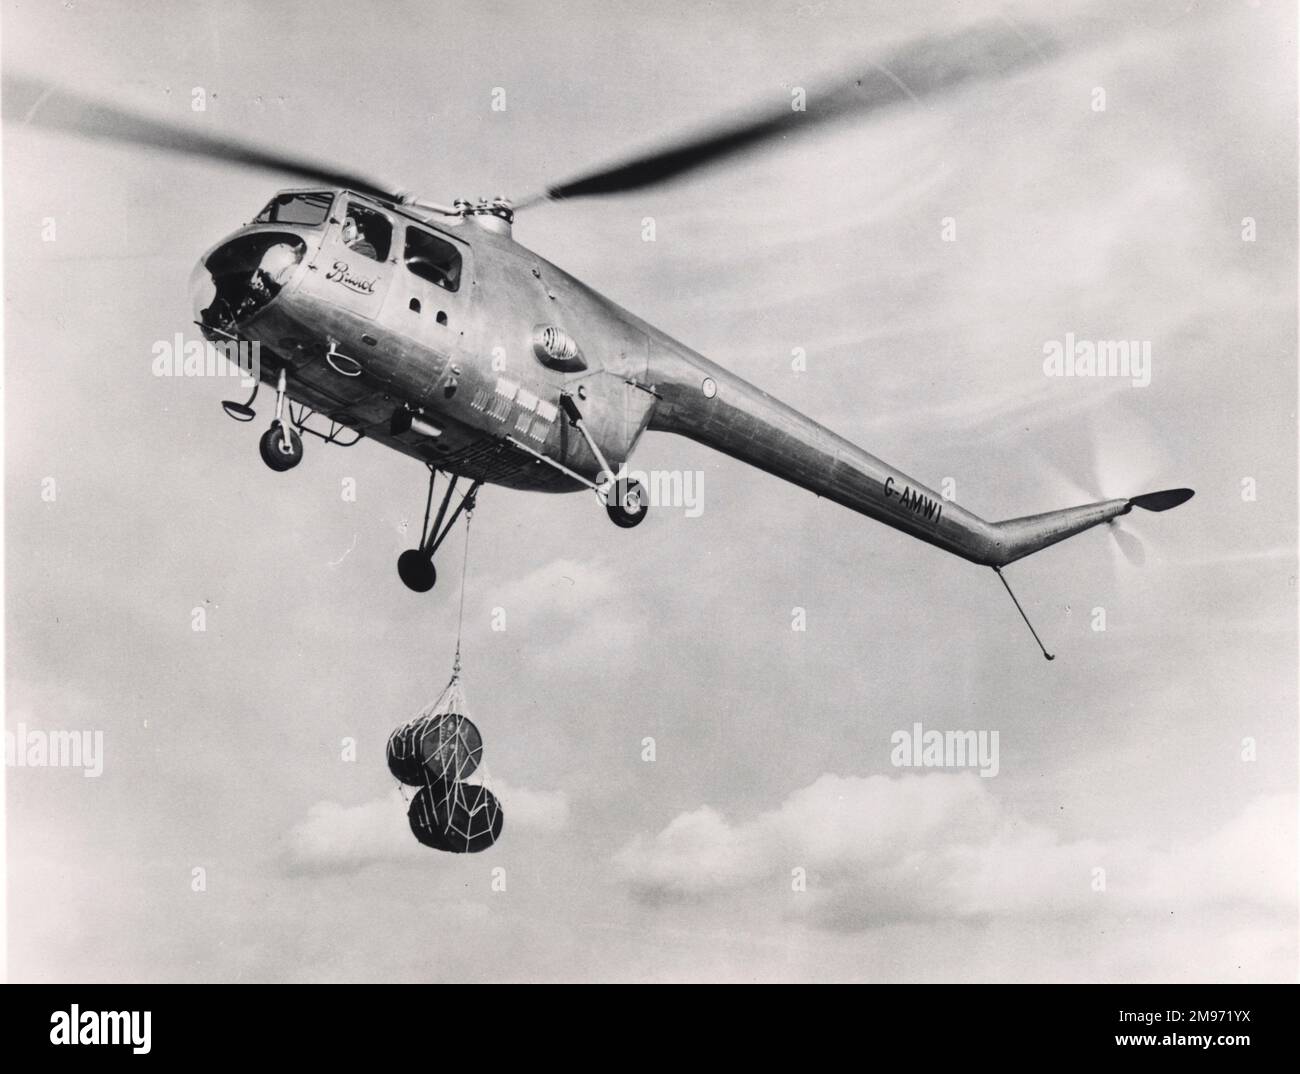 Bristol Sycamore Mk4, G-AMWI, carrying a suspended load of two oil drums. Stock Photo